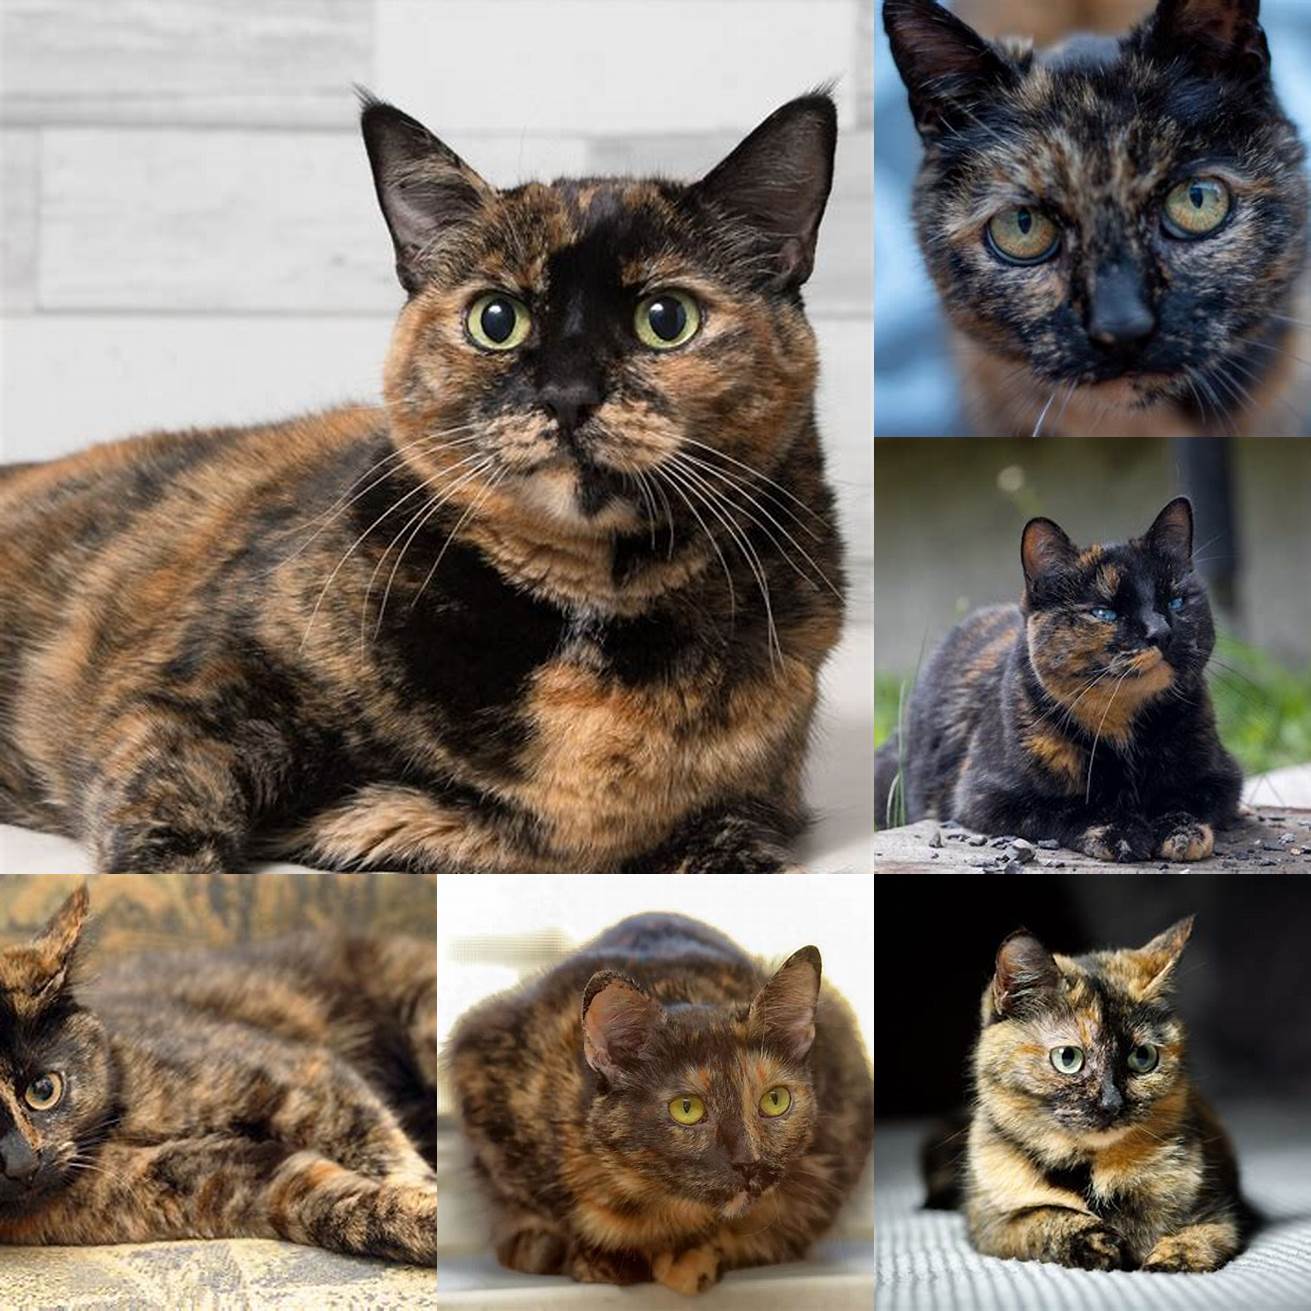 Tortoiseshell cats are believed to bring good luck in some cultures